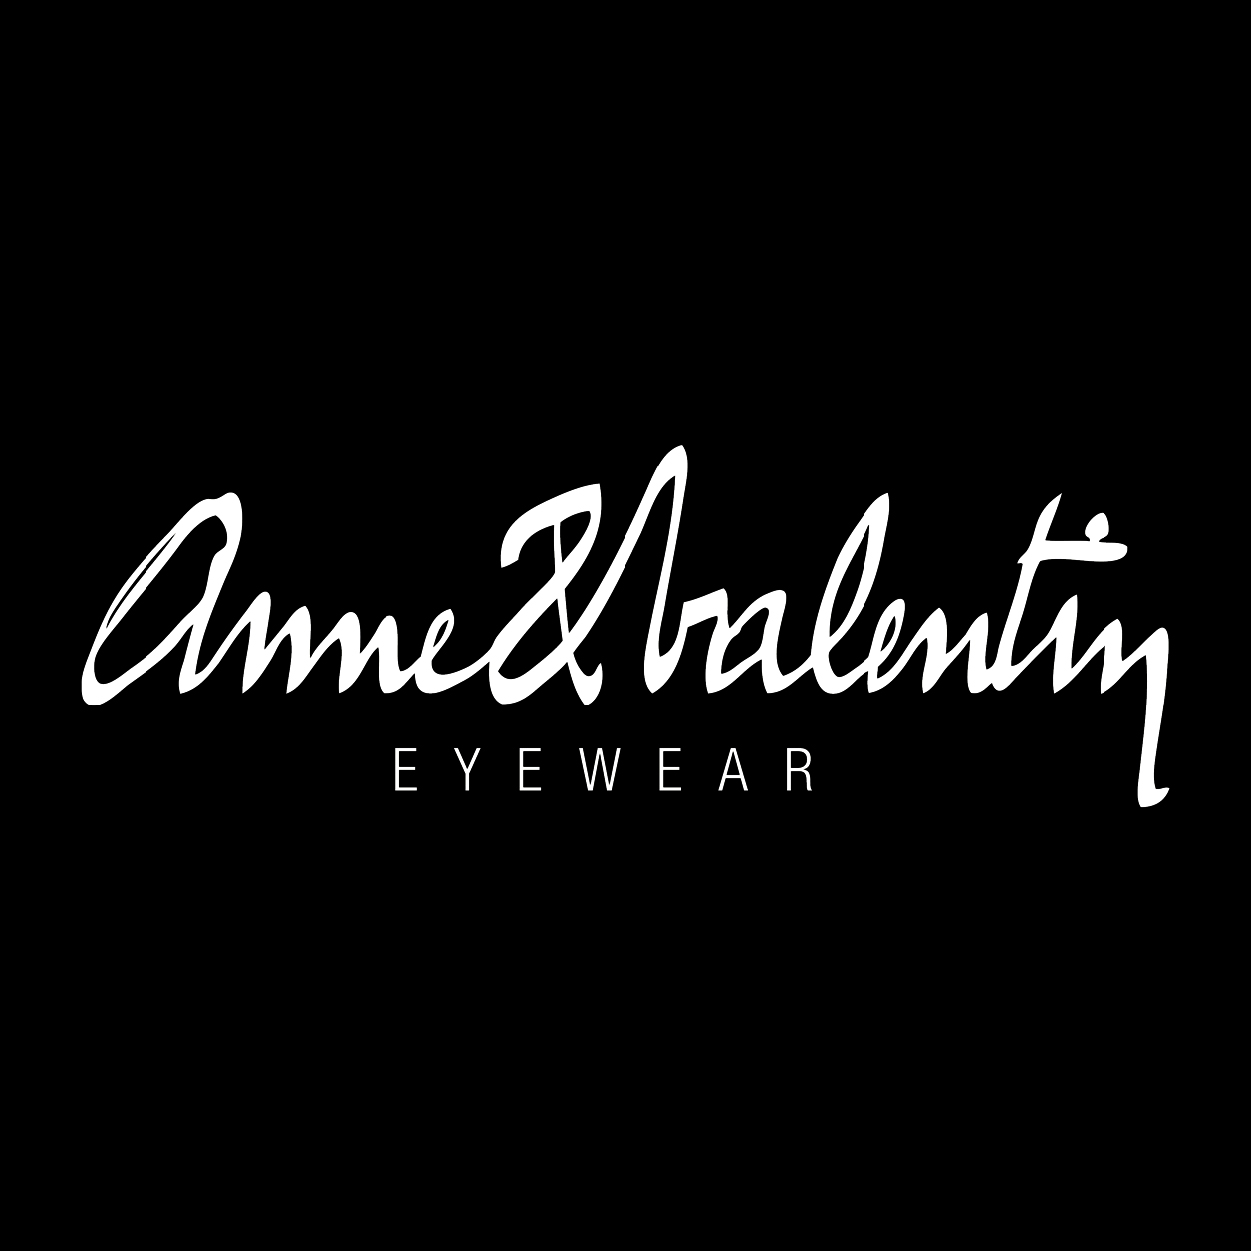 Anne et Valentin Eyewear available from The Eye Makers